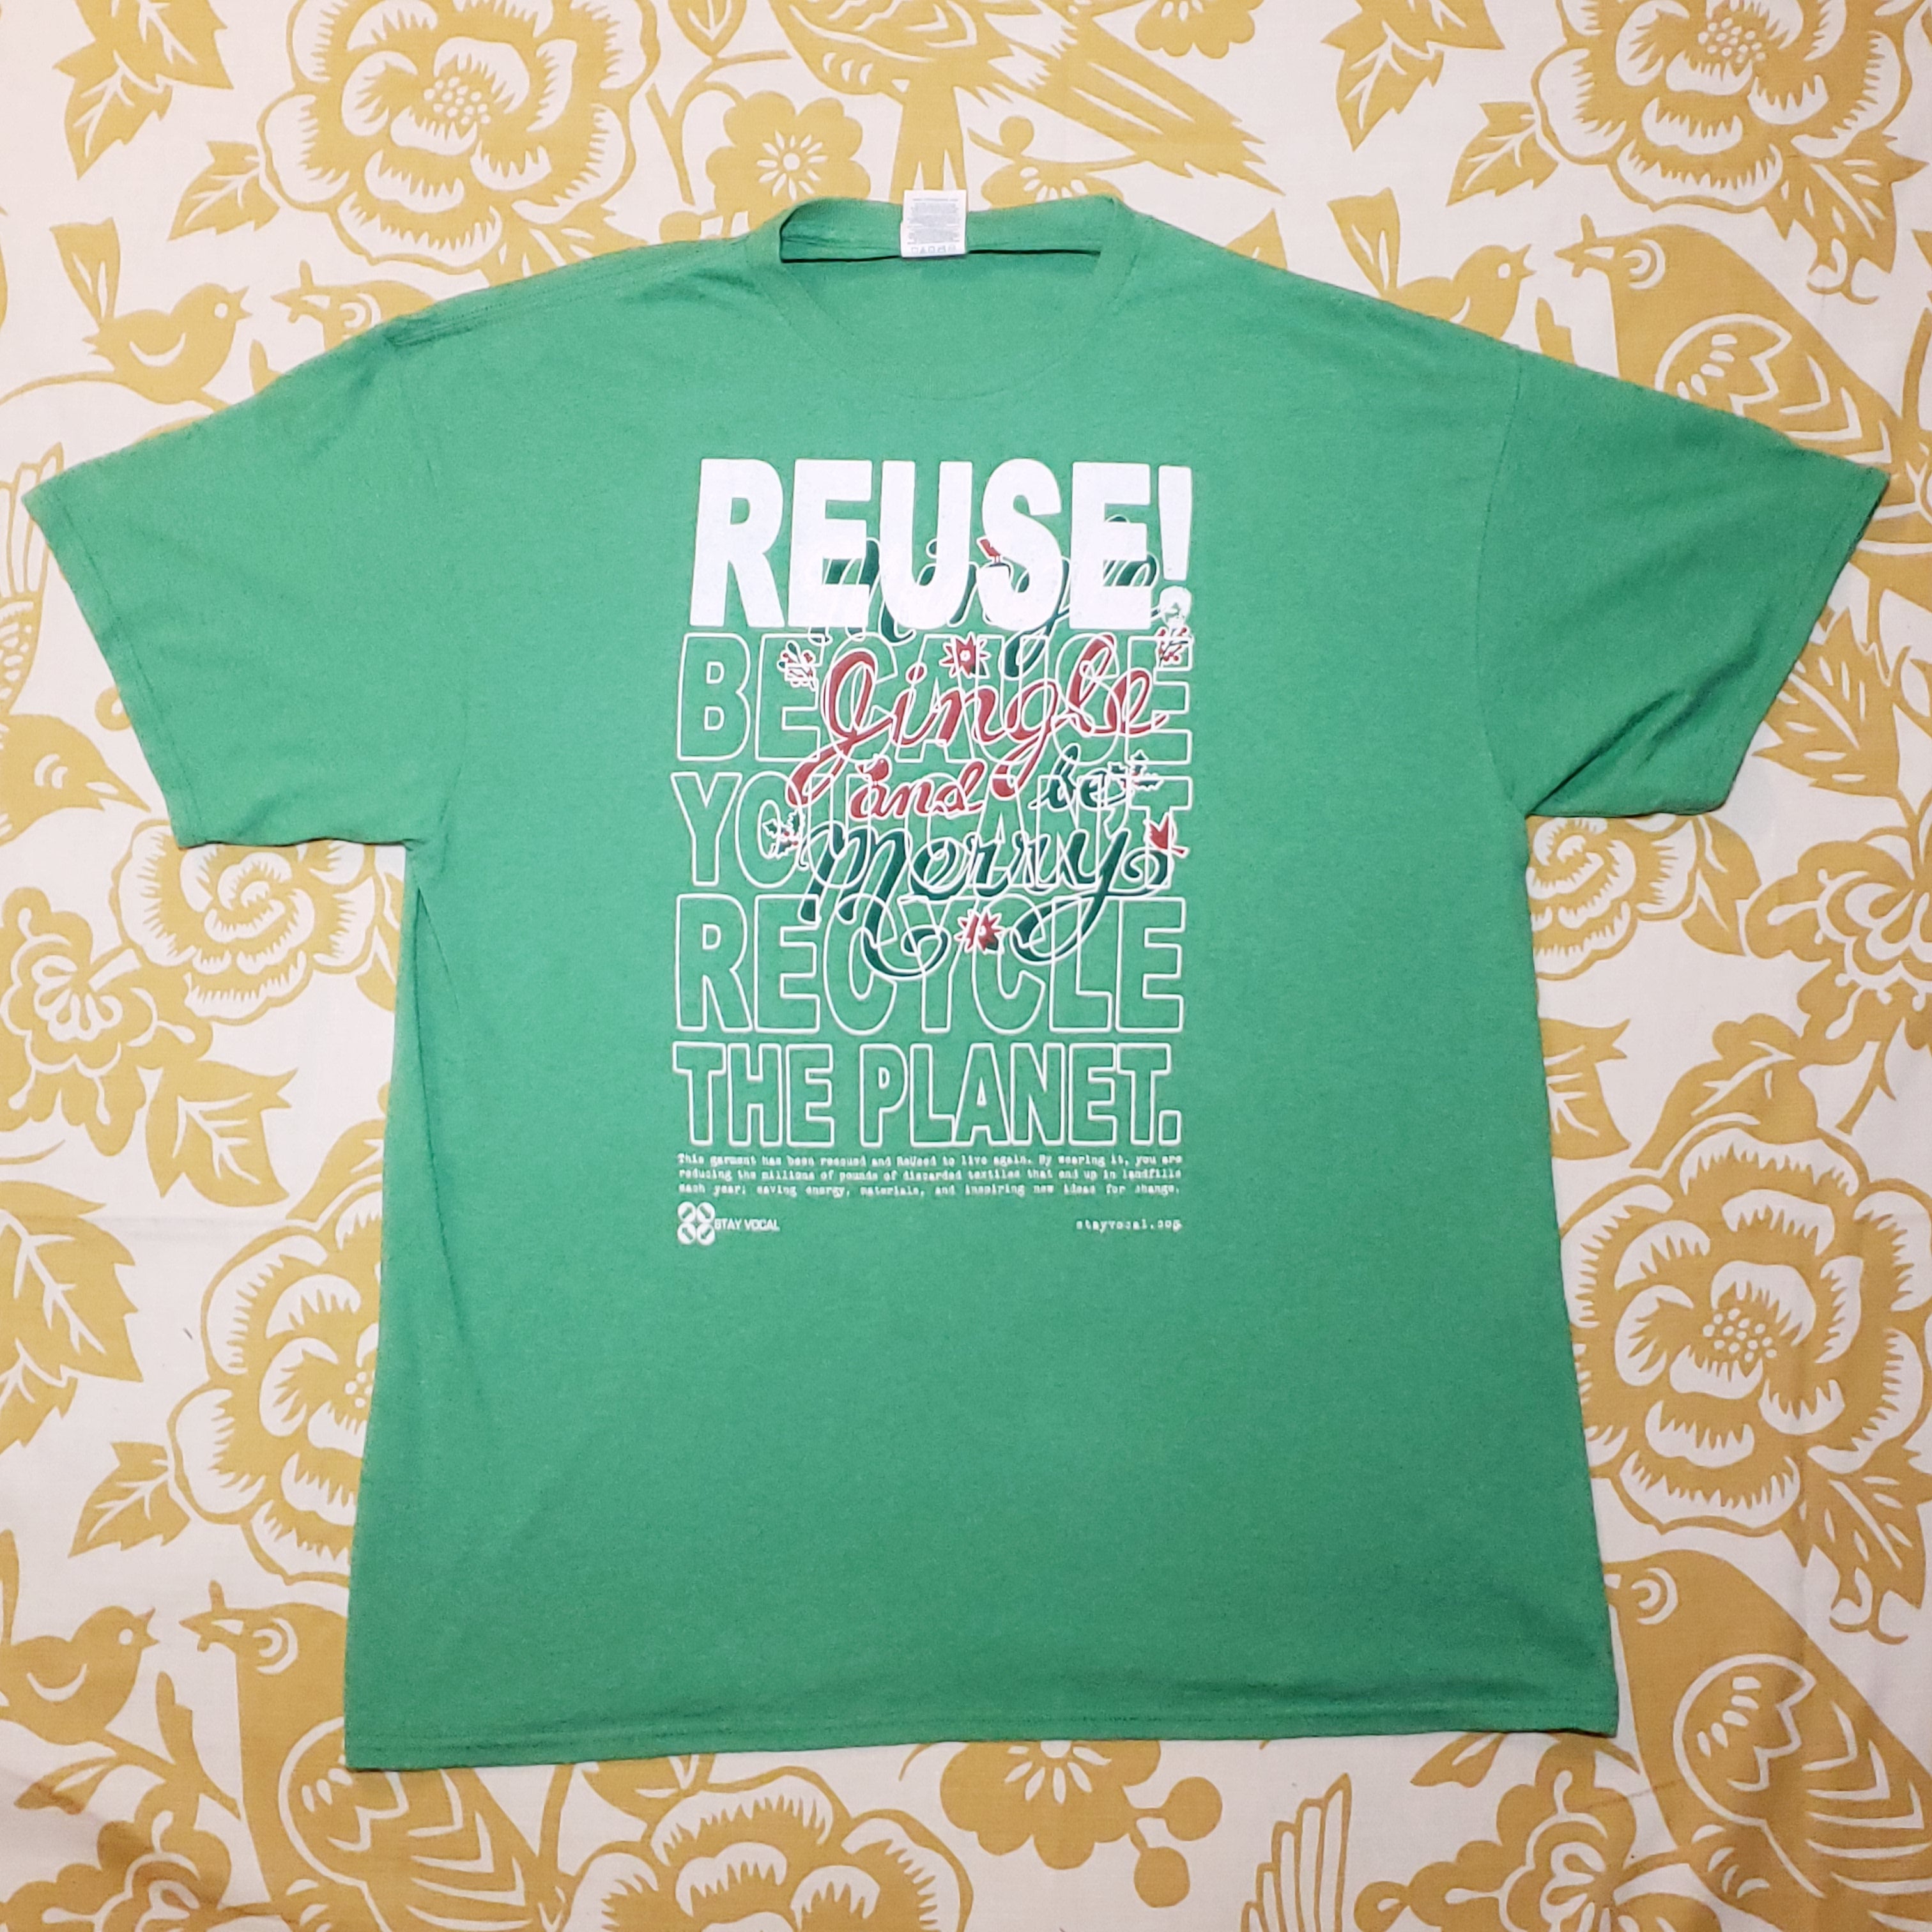 One of a Kind (Men's XL) REUSE! Jingle and Be Merry T-Shirt